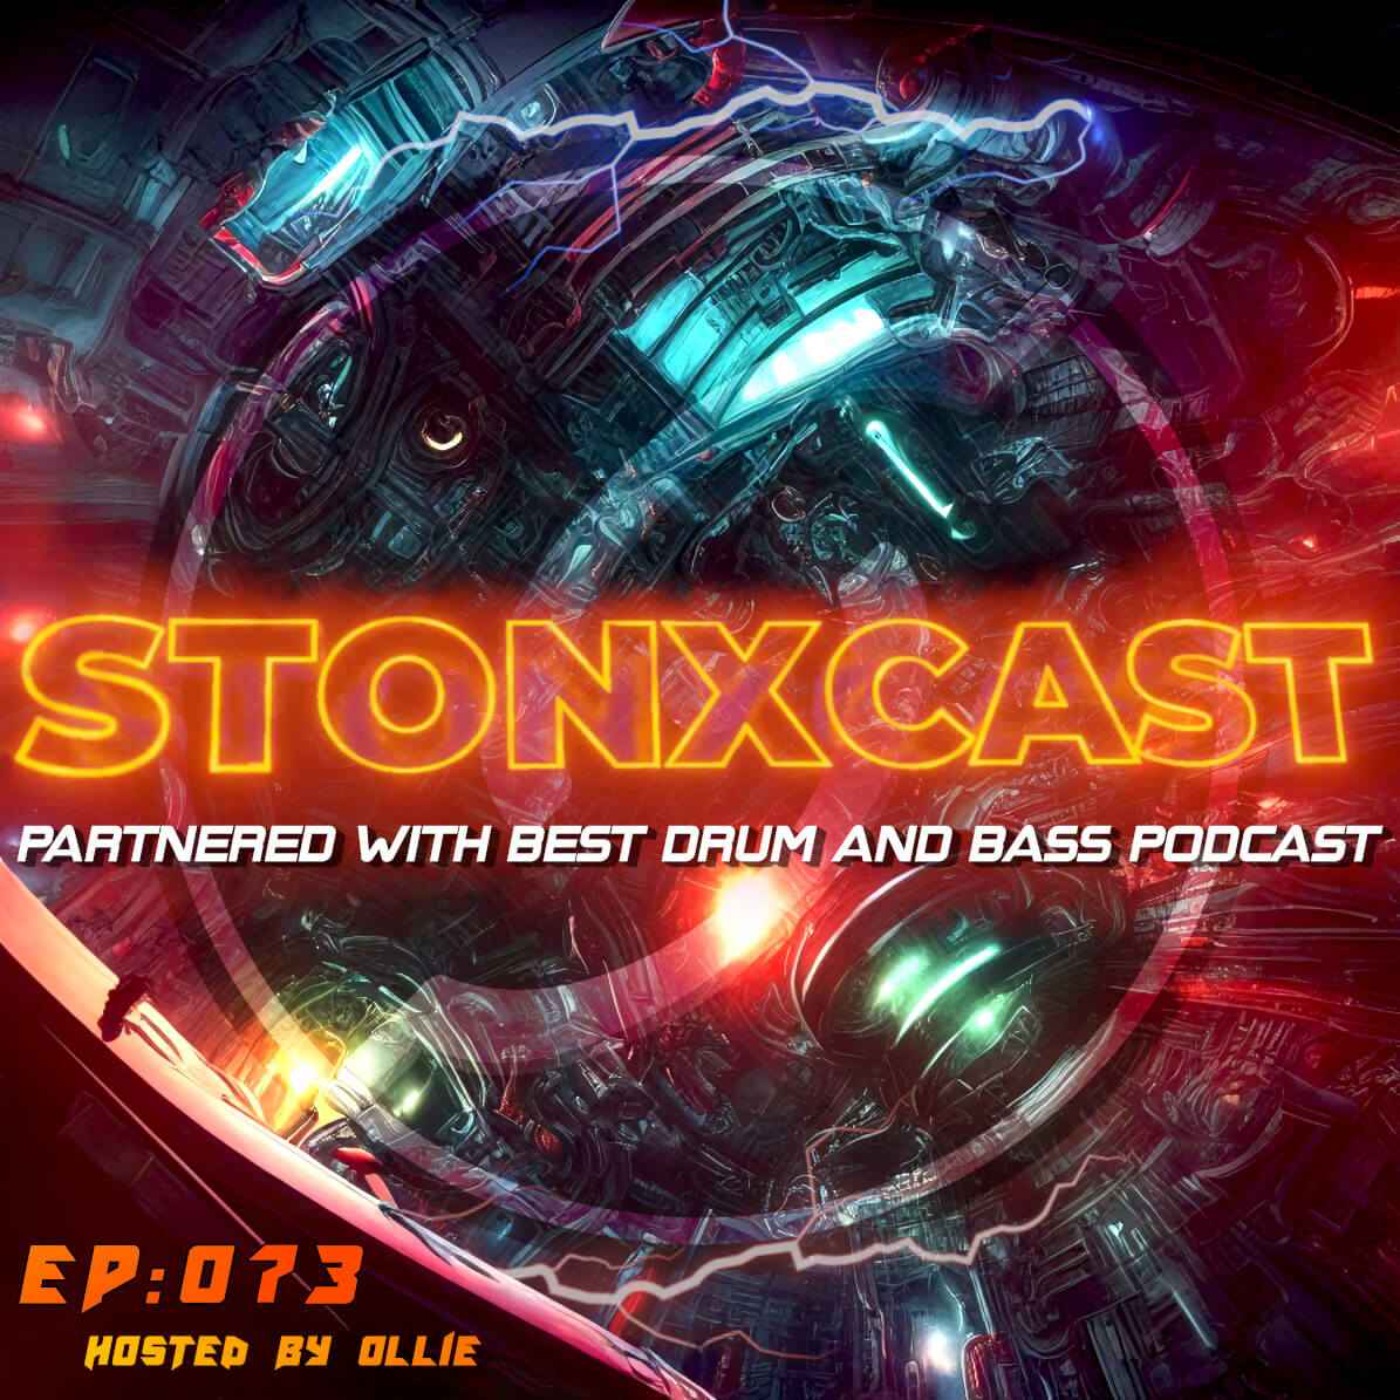 Stonxcast EP:073 - Hosted by Ollie Artwork